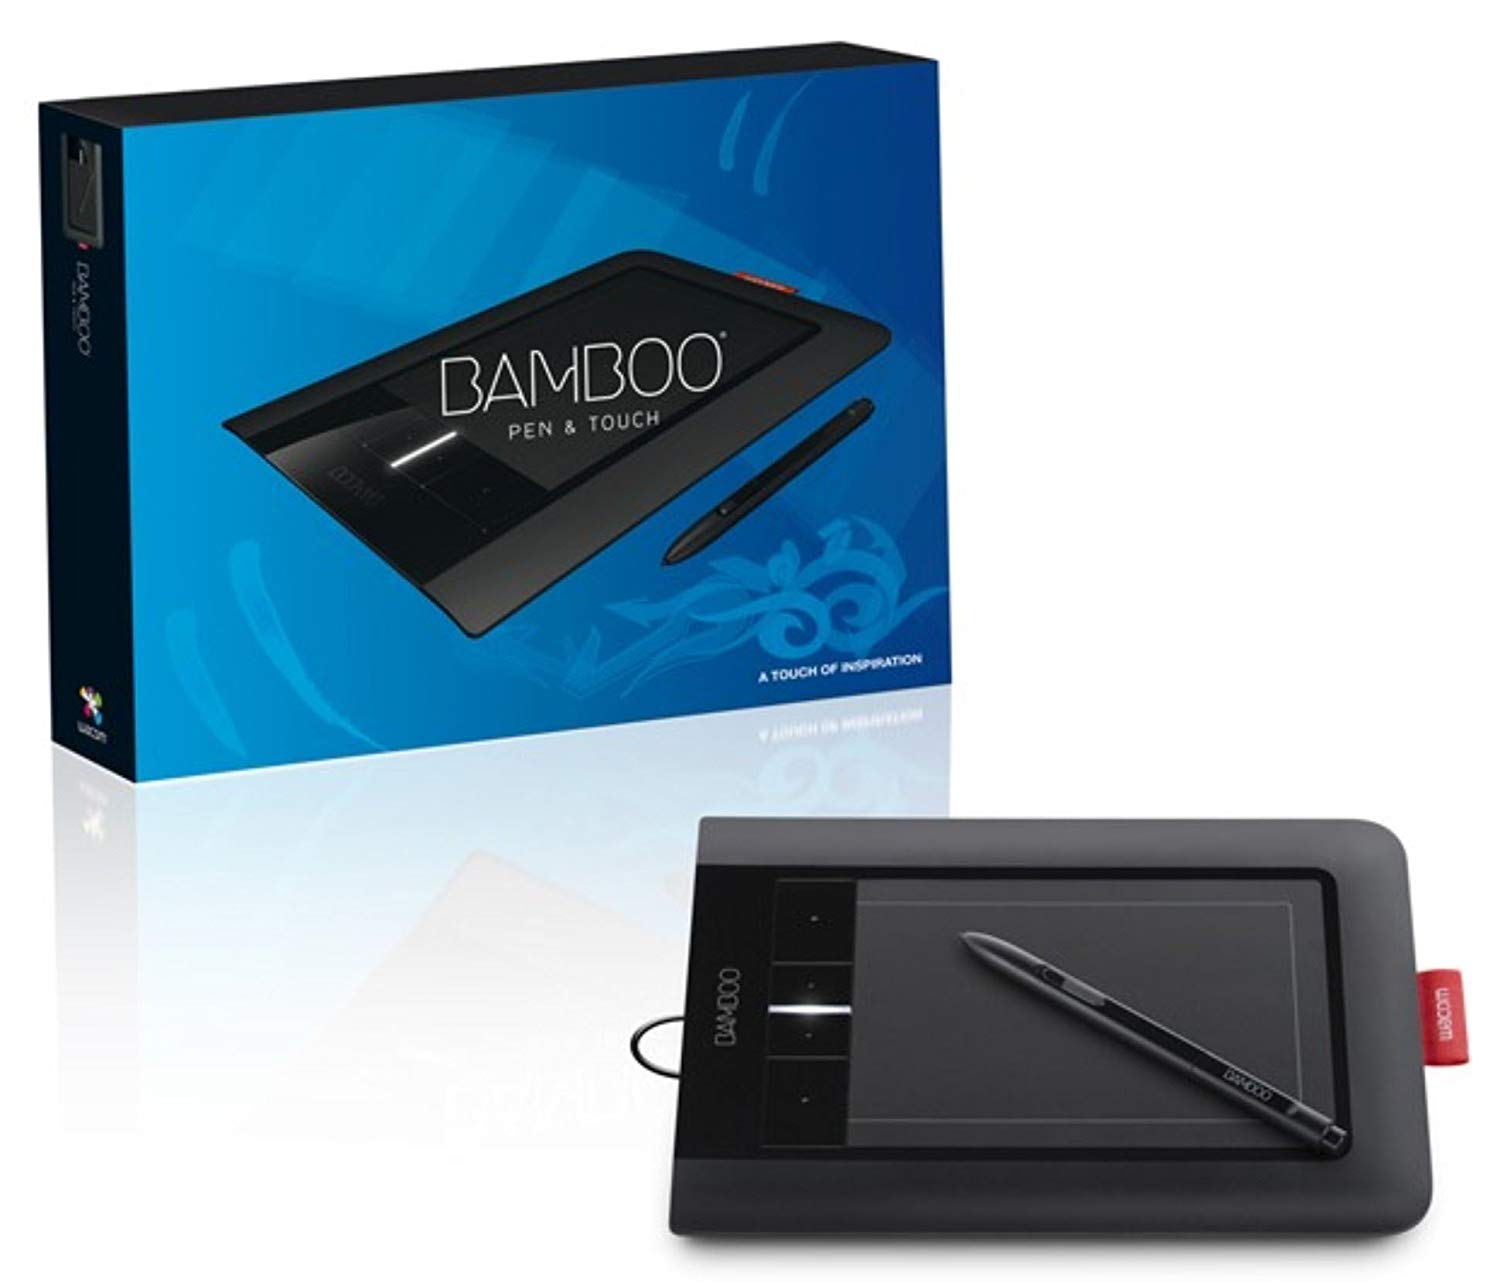 Bamboo pen. Bamboo Pen and Touch - CTH-460. Планшет Wacom Bamboo Pen. Графический планшет Wacom Bamboo CTH-460. Wacom Bamboo Pen Touch CTH-470.